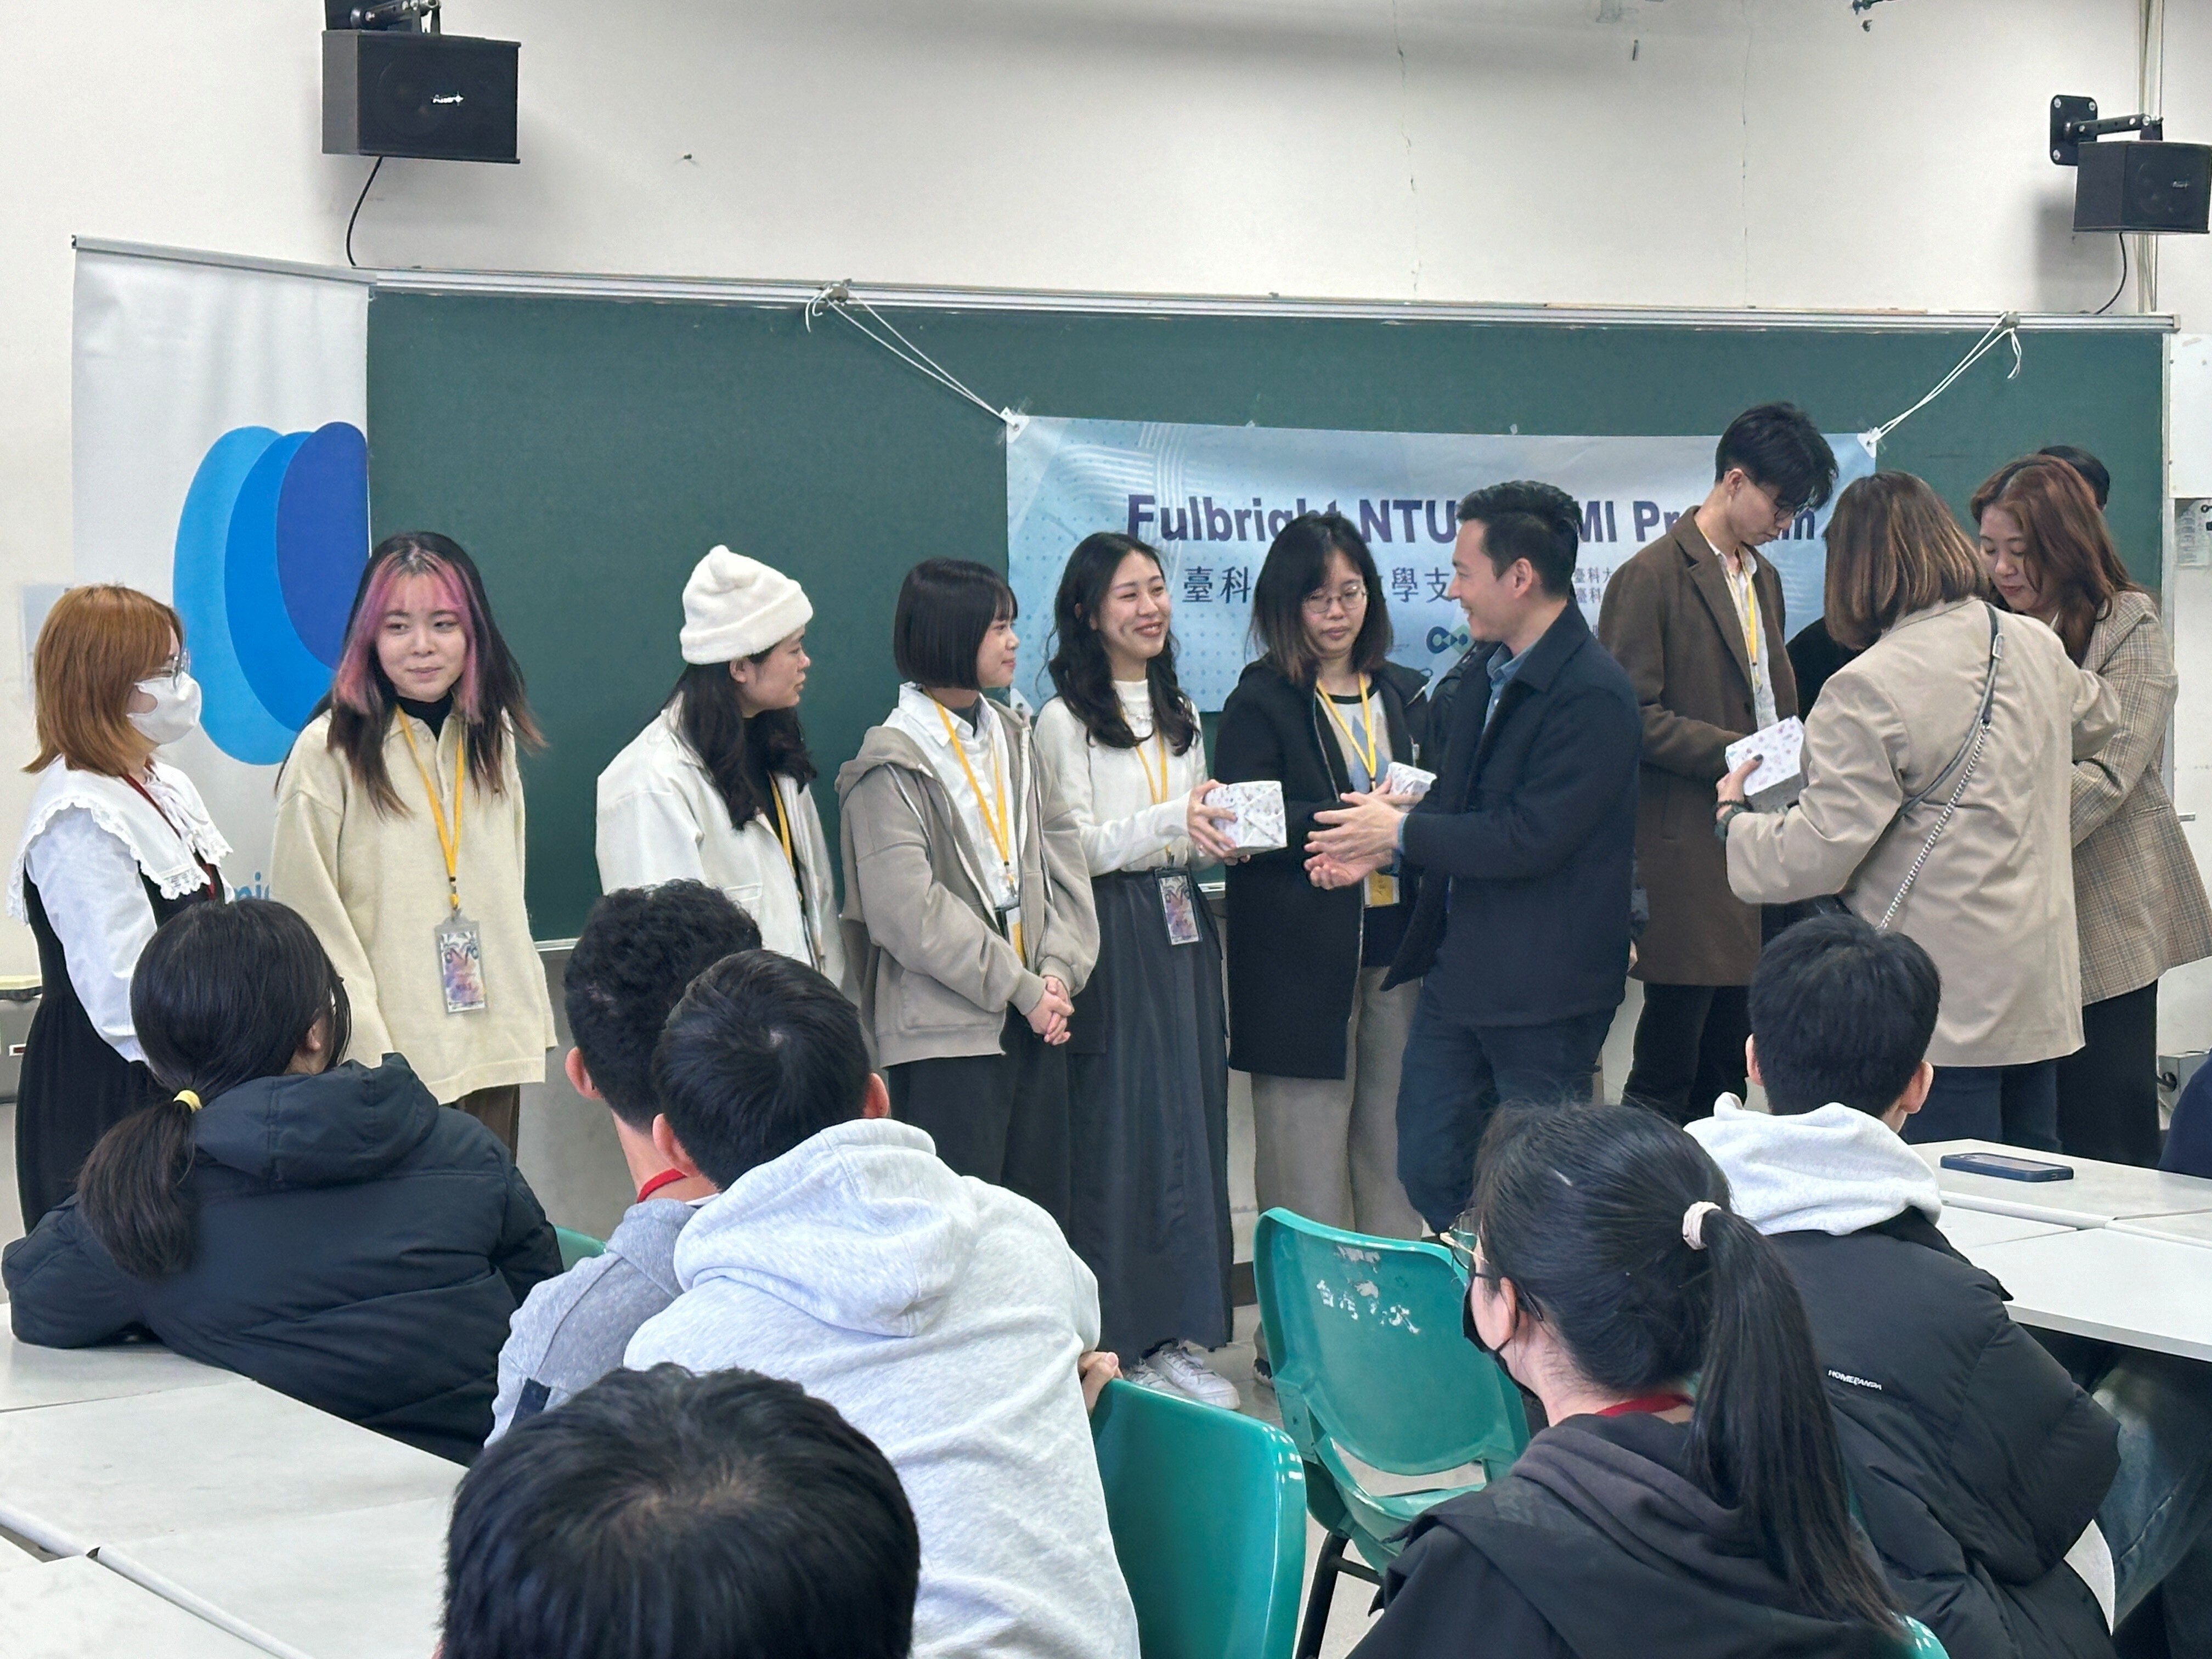 Dean of the College of Liberal Arts and Social Sciences and Director of the Language Center at Taiwan Tech, Shao-Ting Hung (fourth from the right), presenting awards to outstanding students.